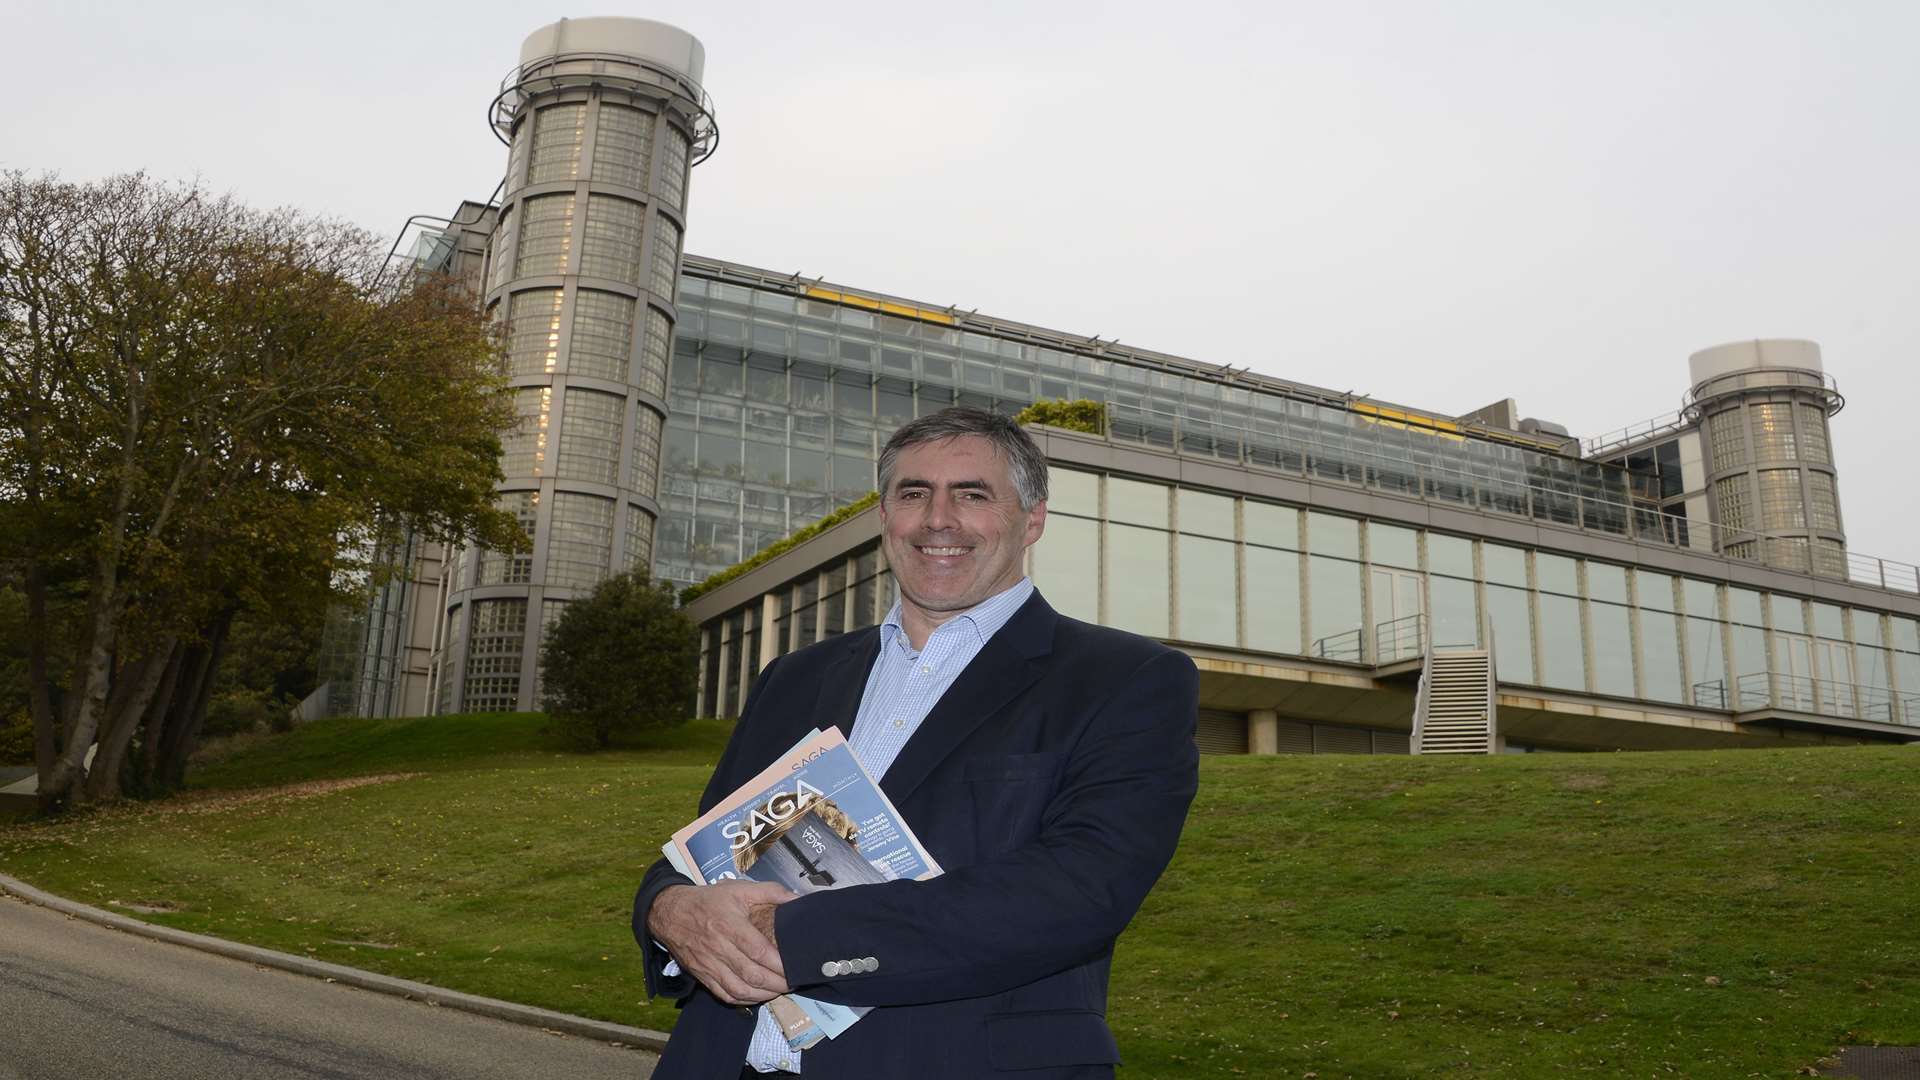 Saga chief executive Lance Batchelor at the company's headquarters in Enbrook Park, Sandgate